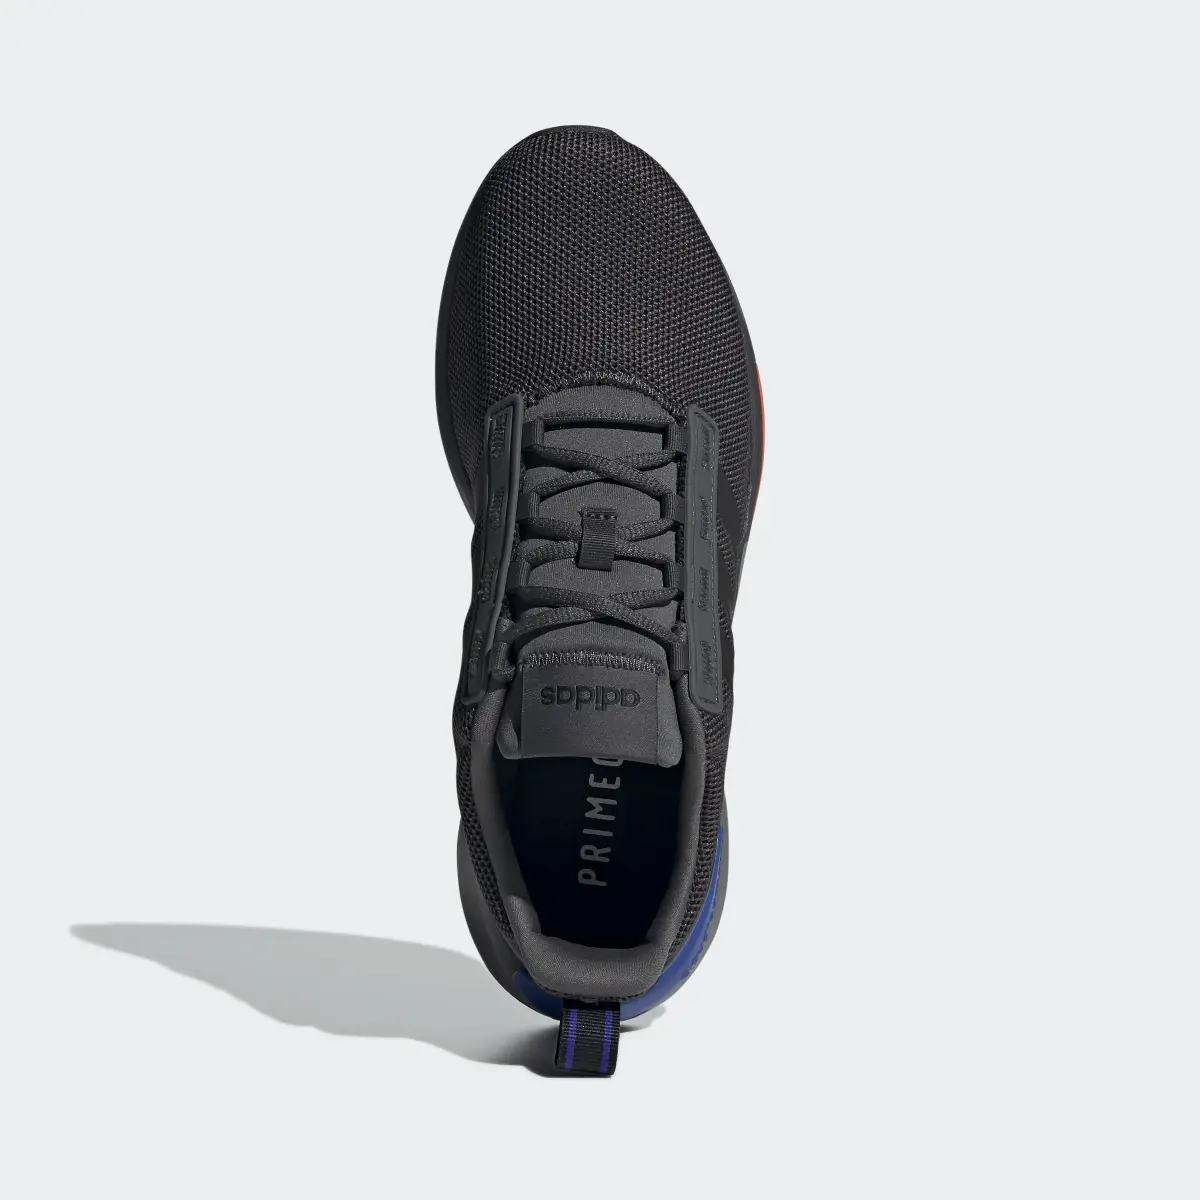 Adidas Racer TR21 Shoes. 3